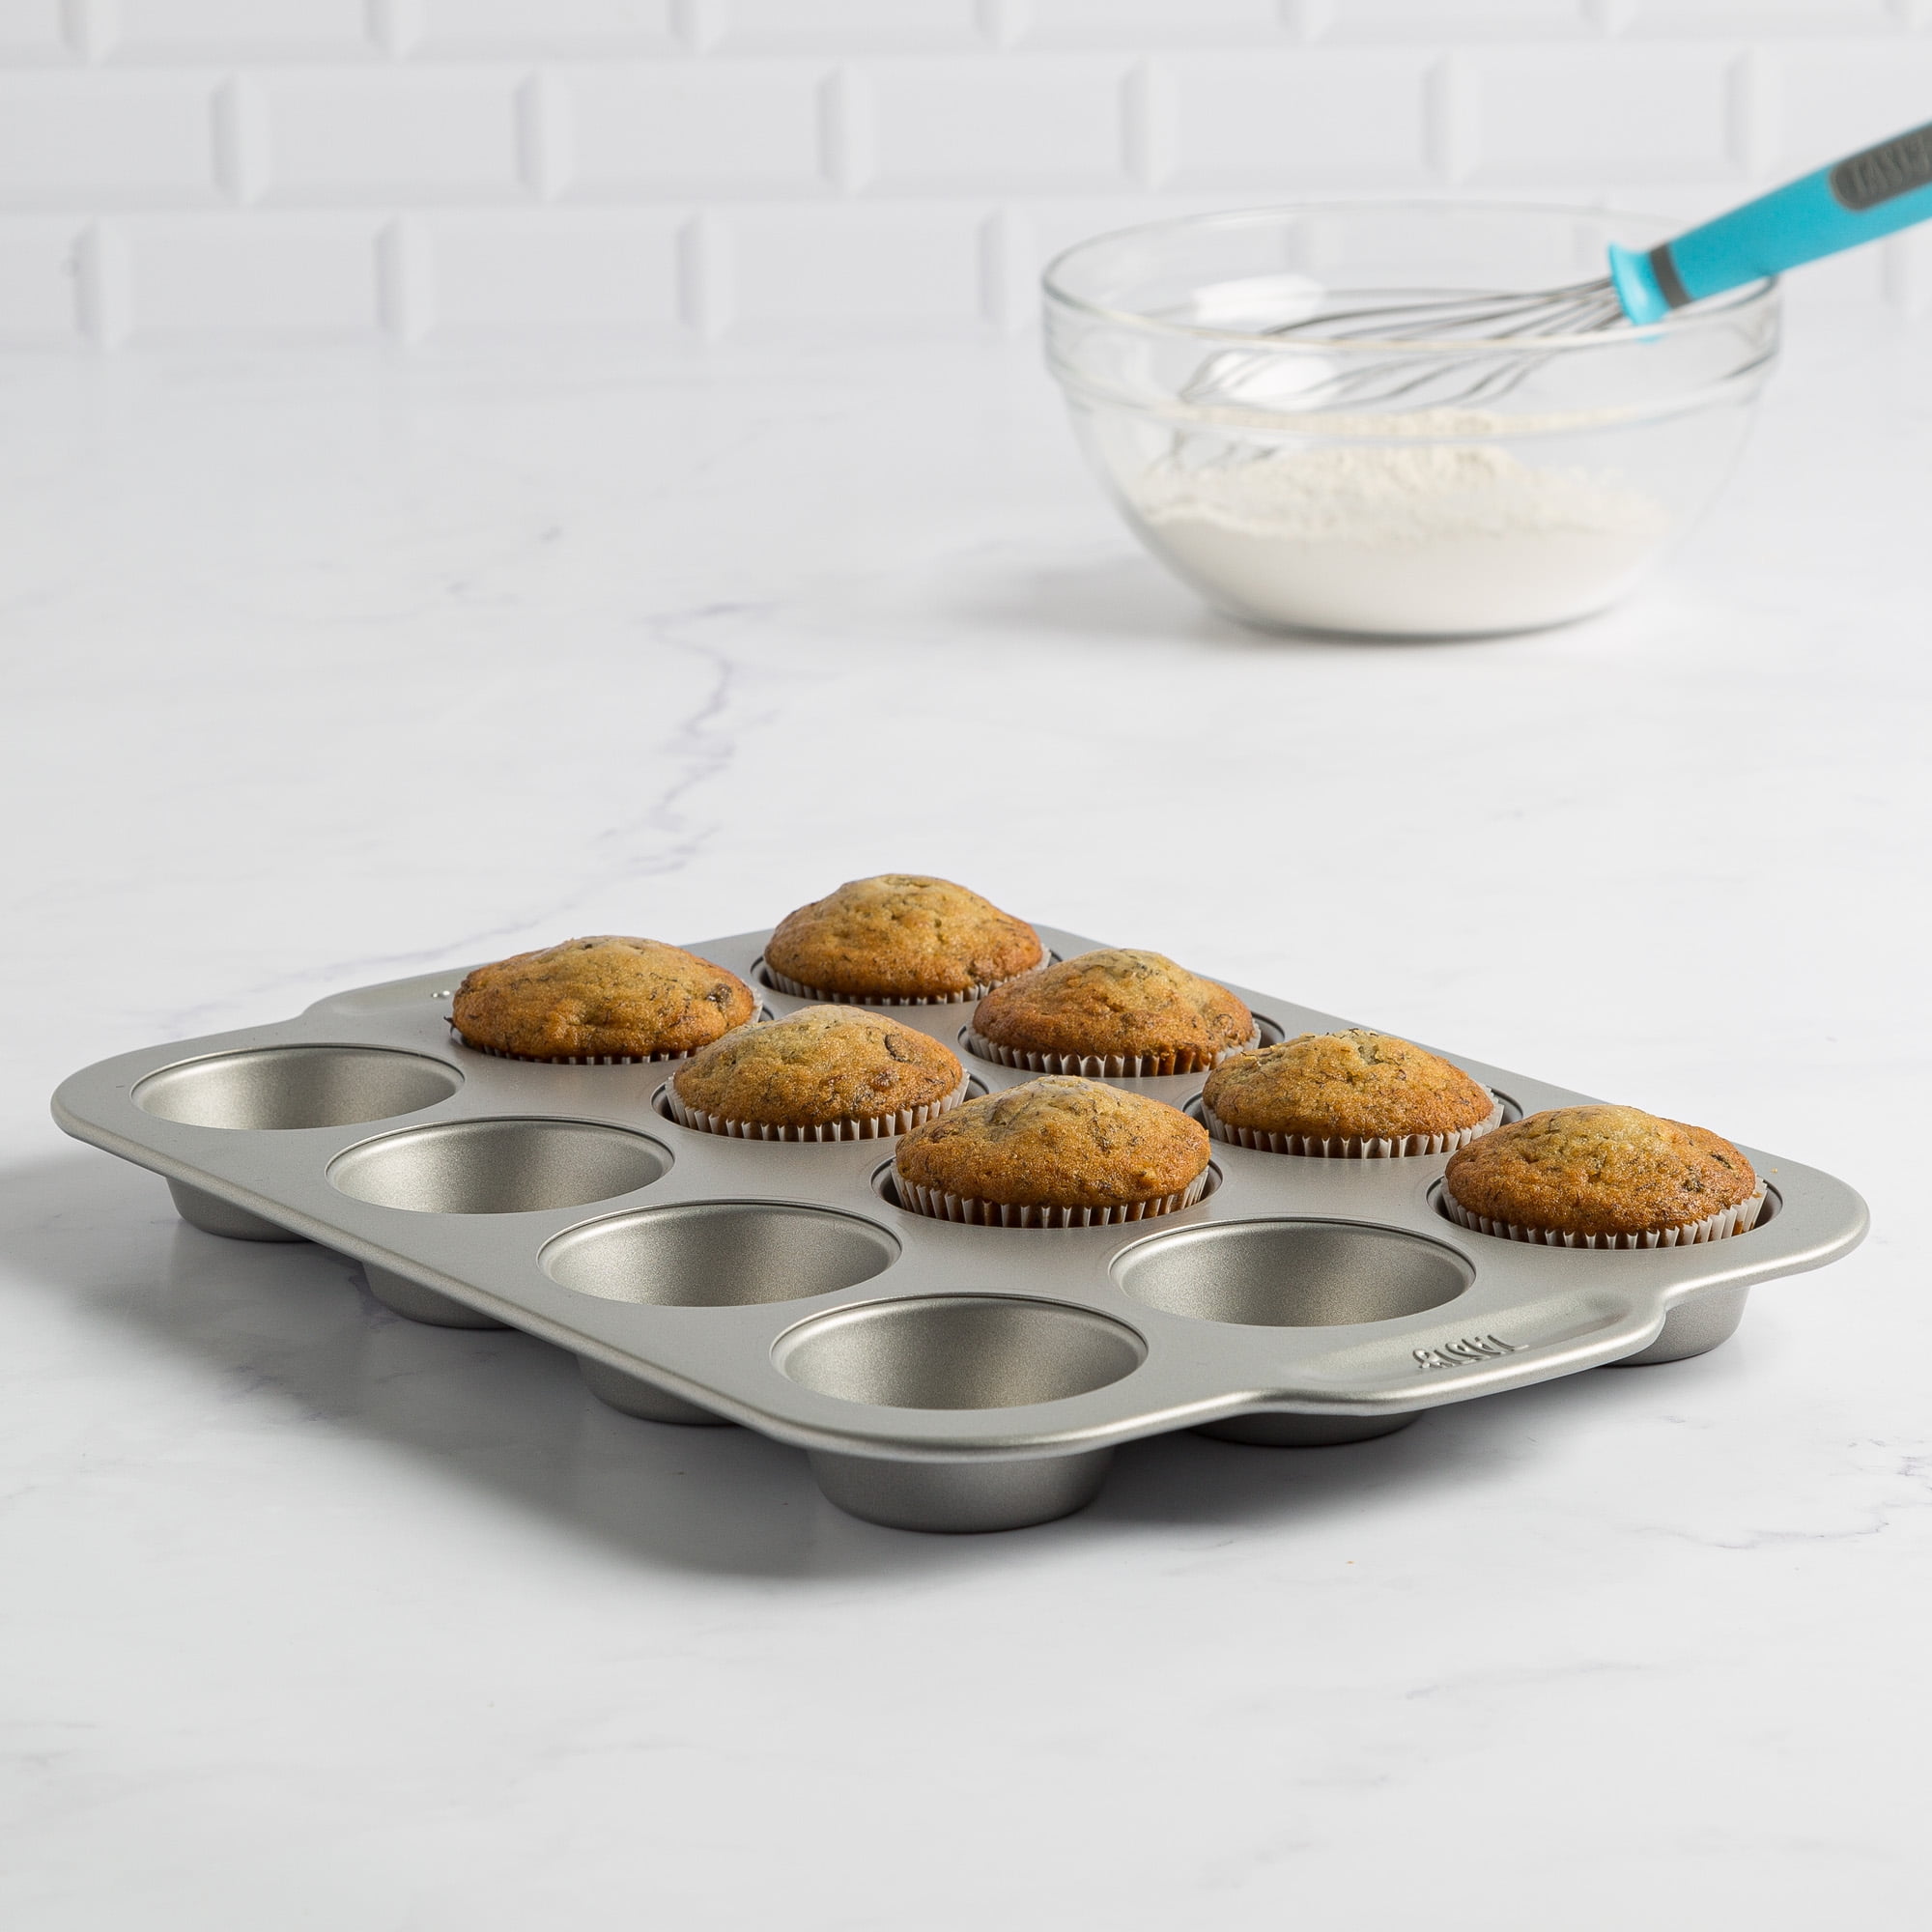 Tasty Carbon Steel Non-Stick Muffin/Cupcake Pan, 12 Cups